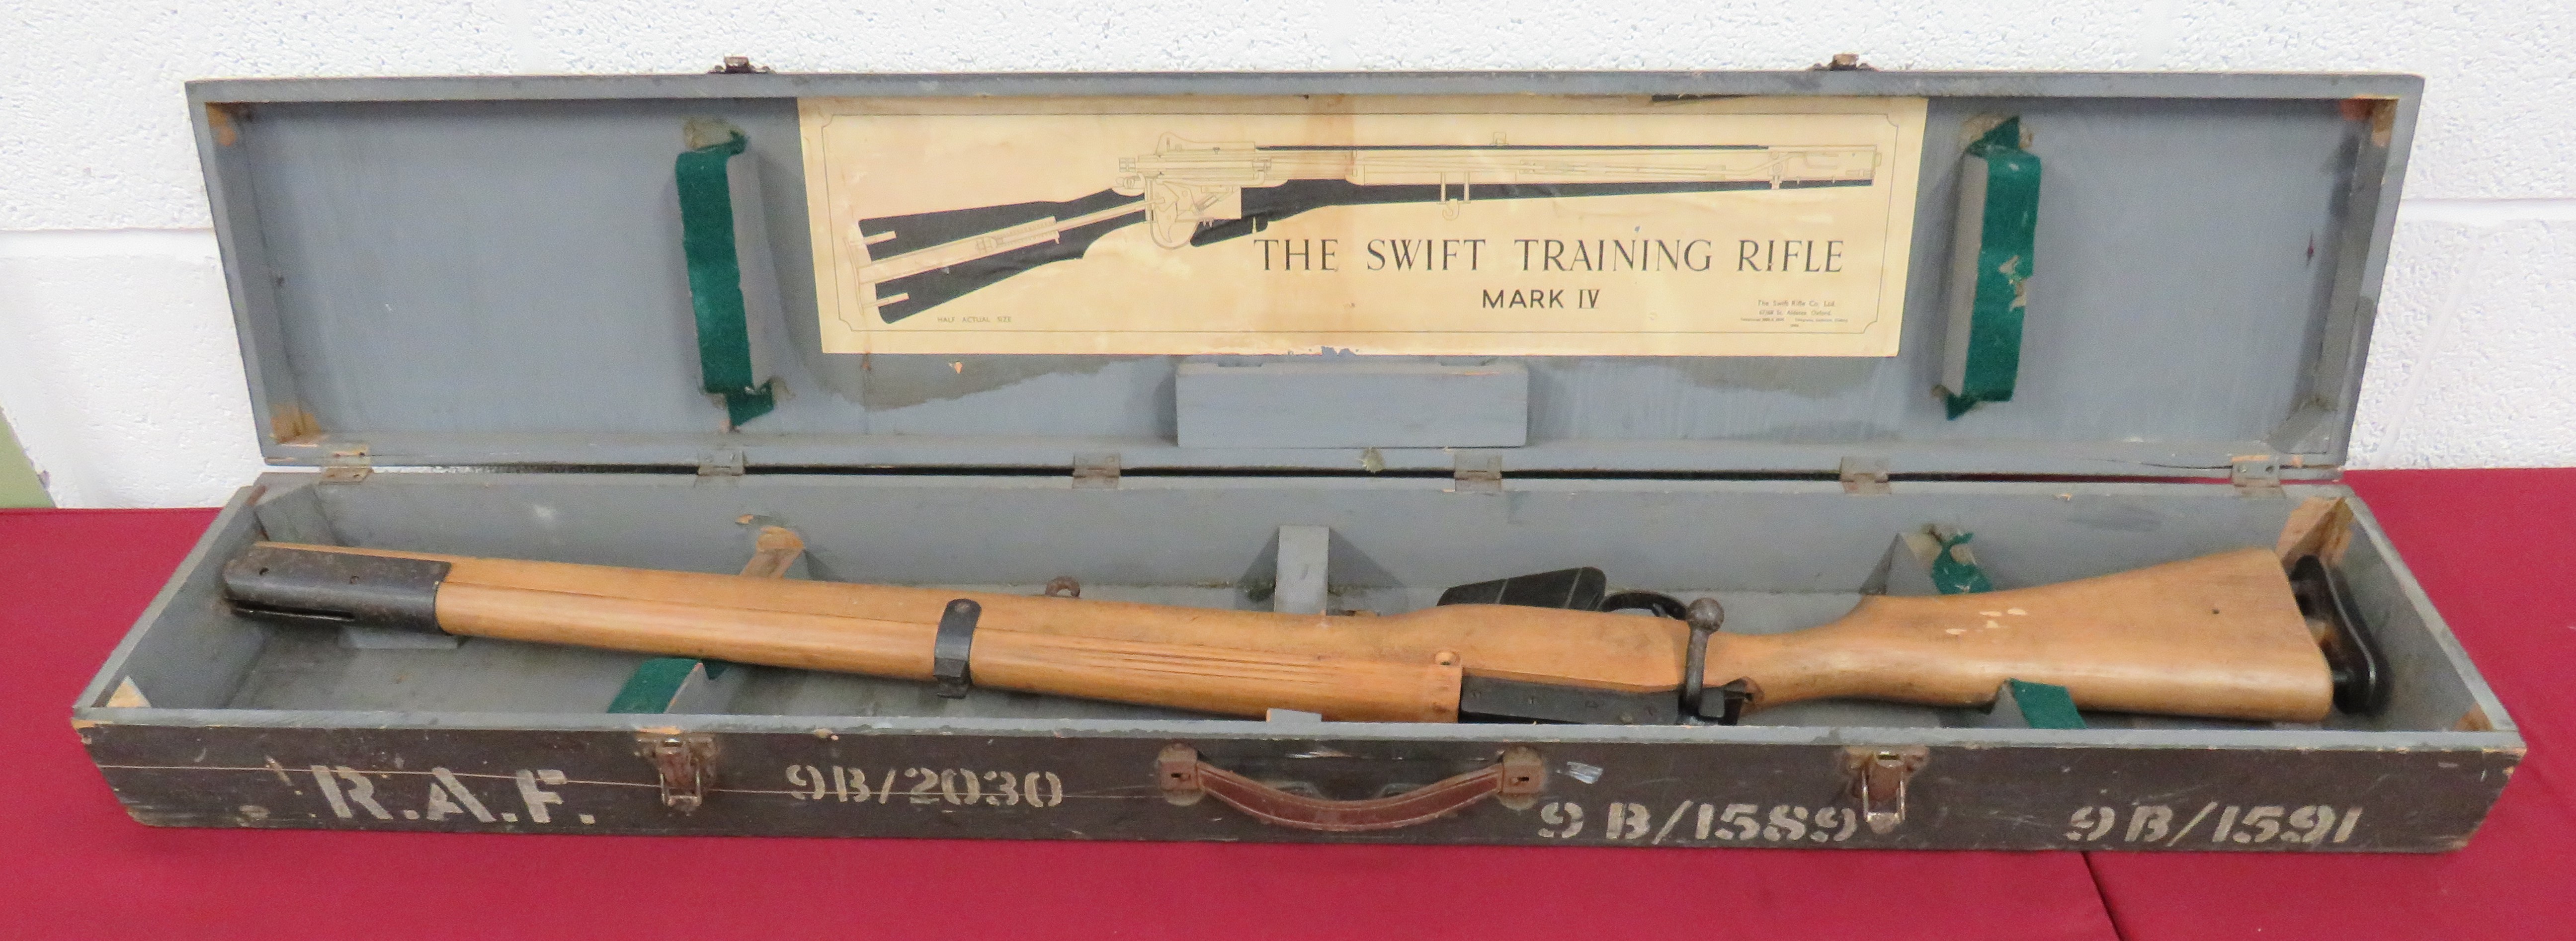 Royal Air Force Issue Swift Training Rifle in the form of a SMLE rifle.  Polished wooden stick and